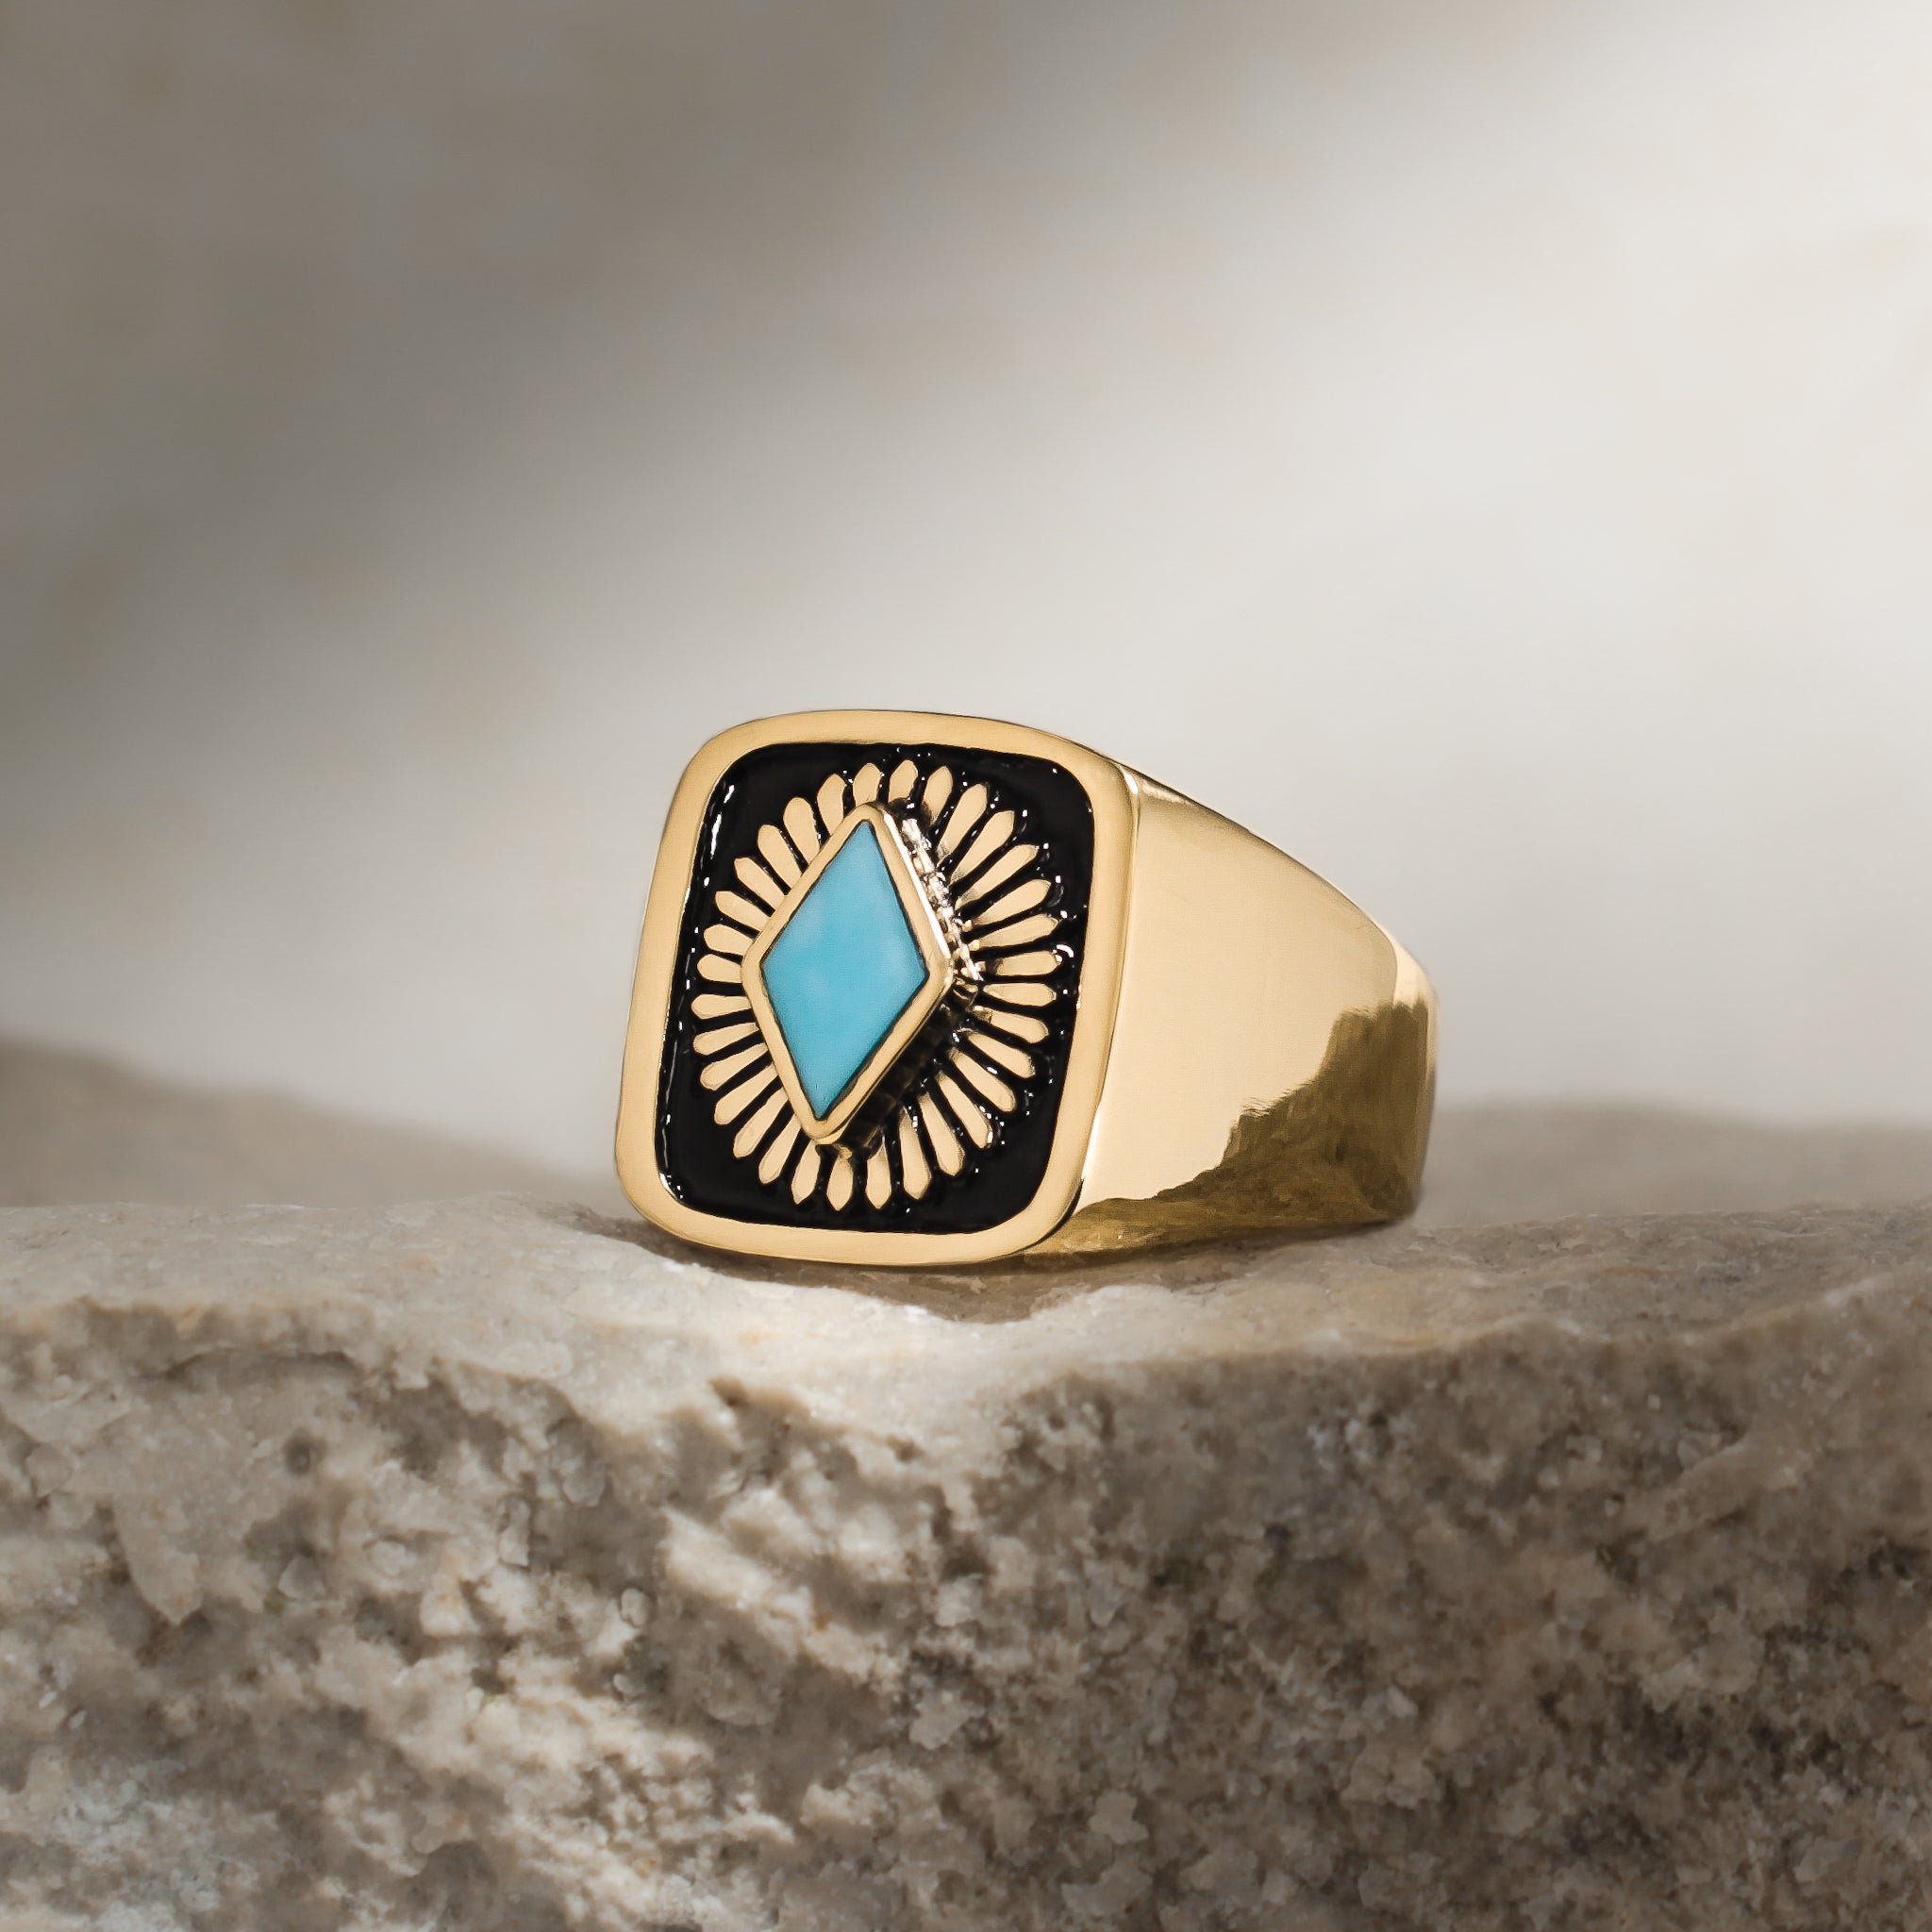 Eye-catching ring with a turquoise centerpiece and black enamel background, perfect for adding a pop of color to any outfit